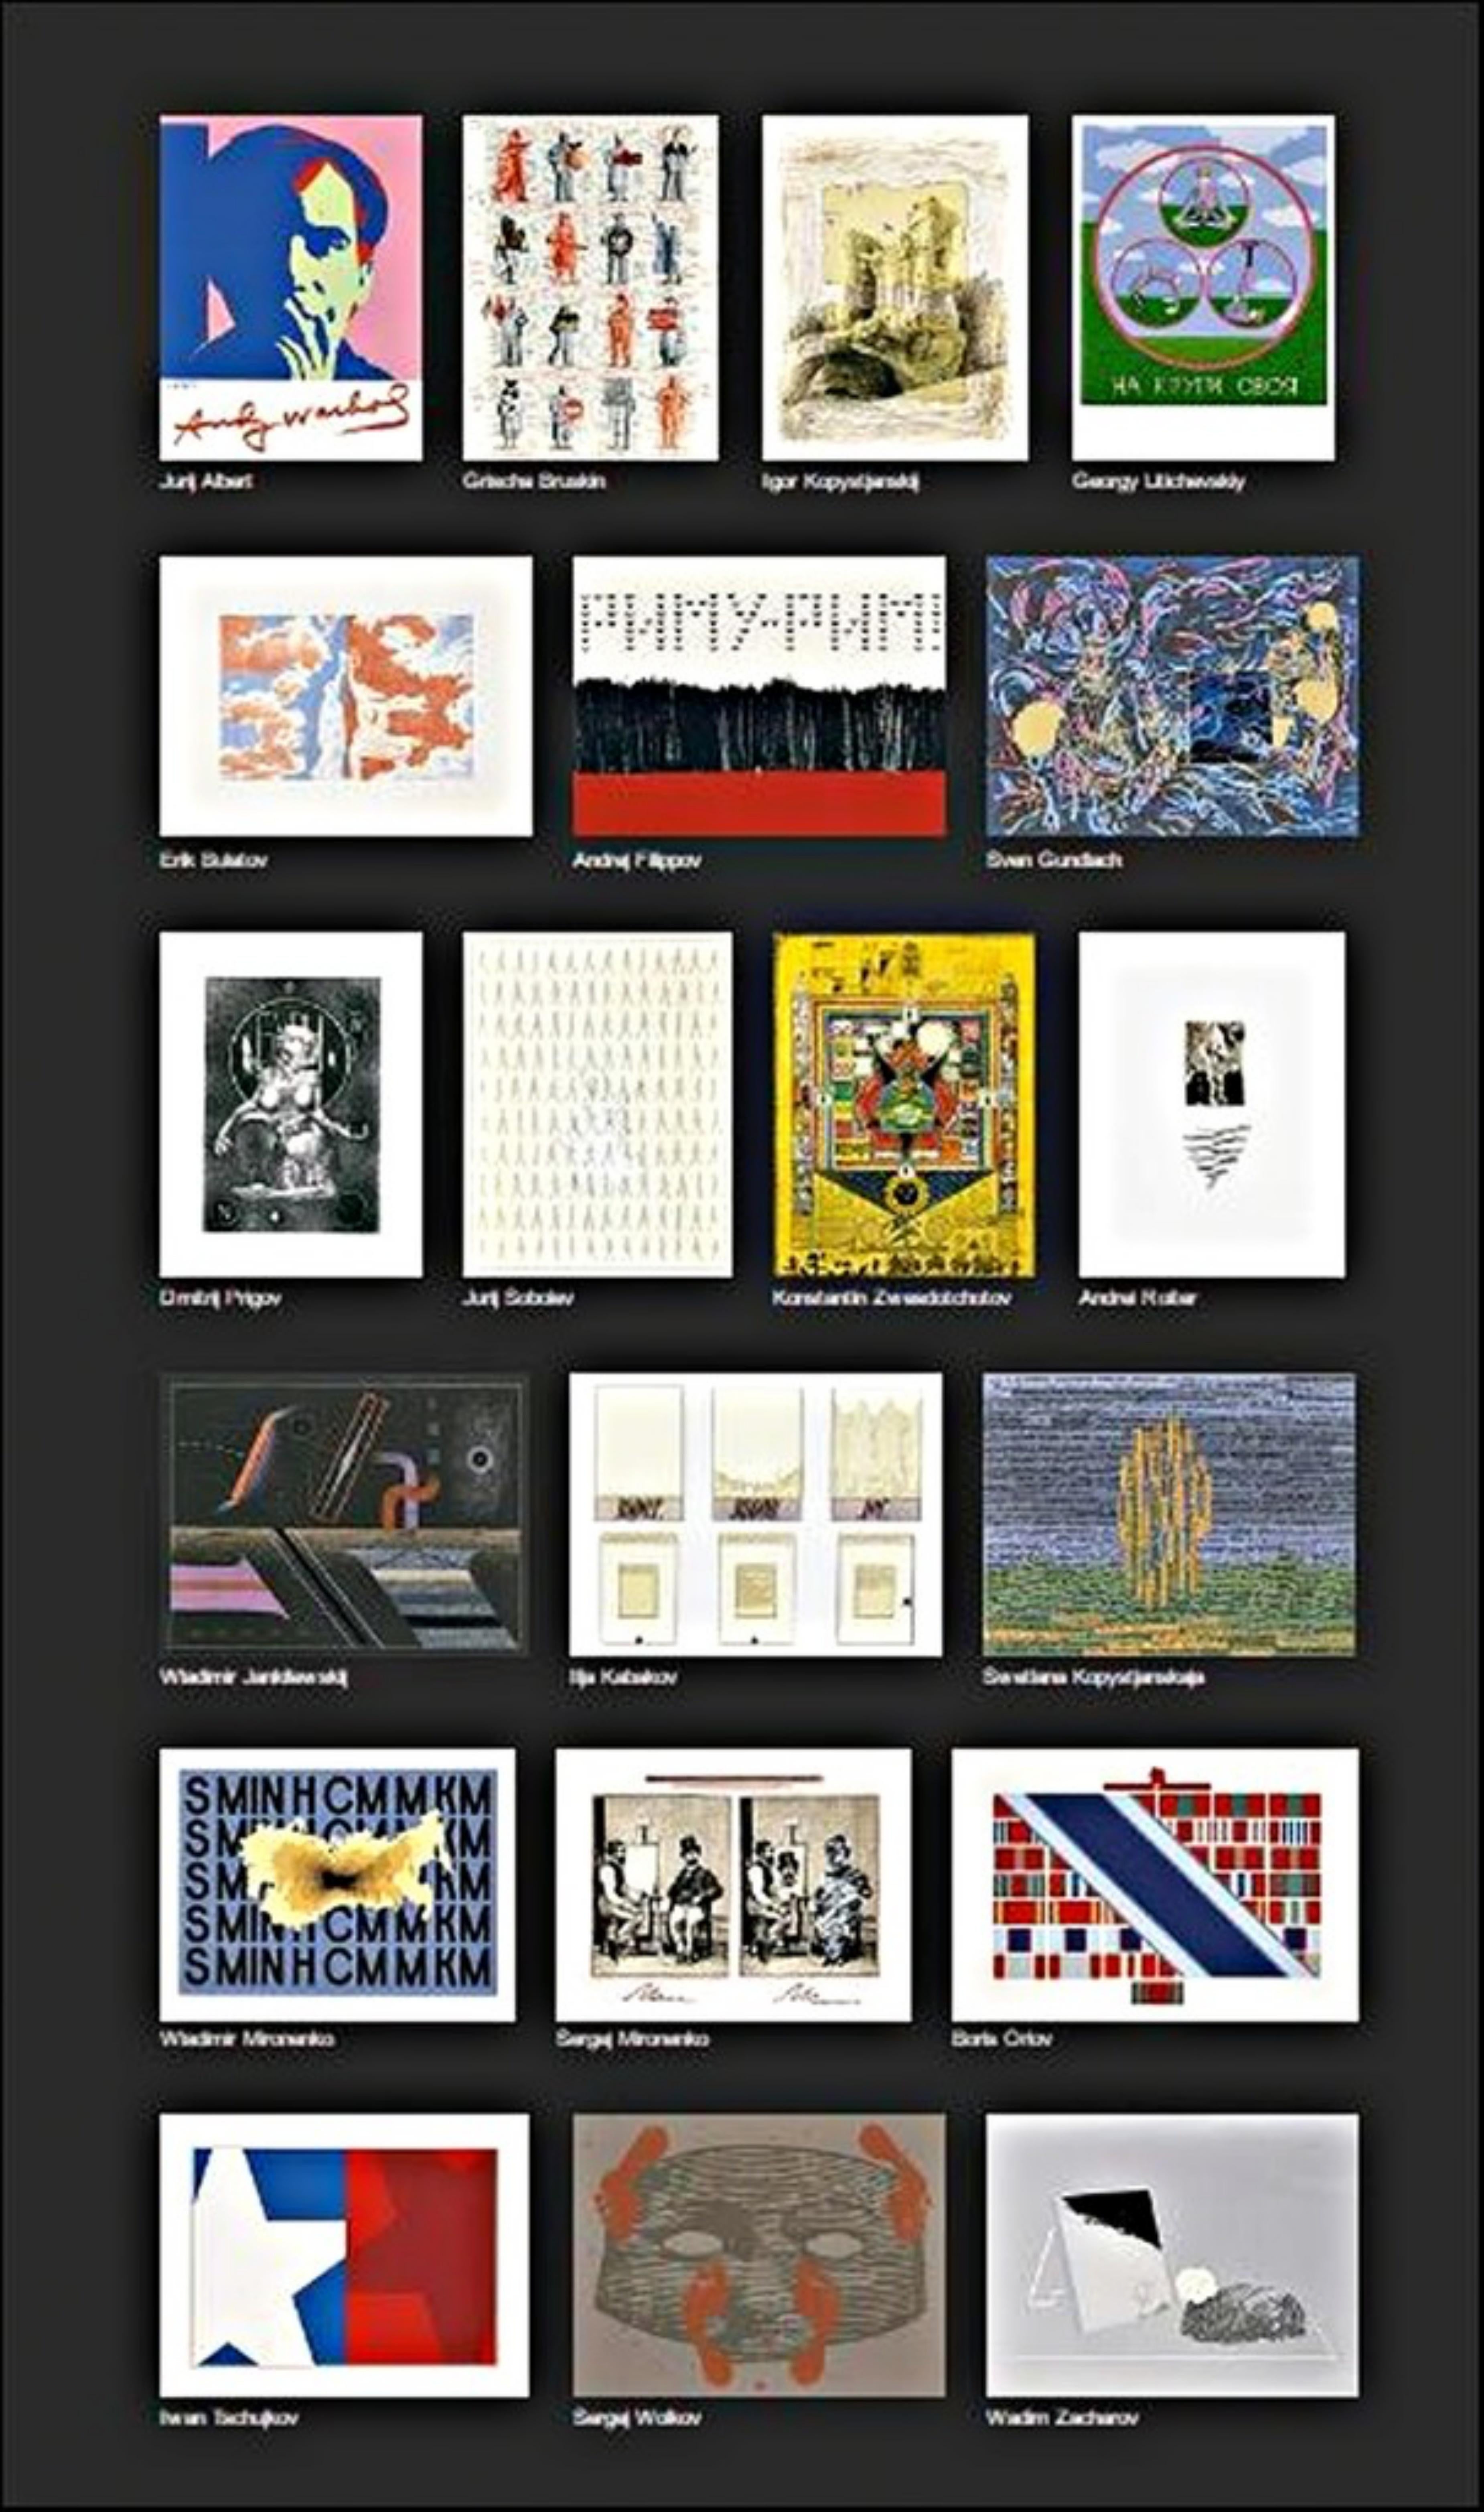 Aufbruch Aus Moskau MockBa: Suite of 20 signed prints top Russian artists 64/100 - Print by Various Artists